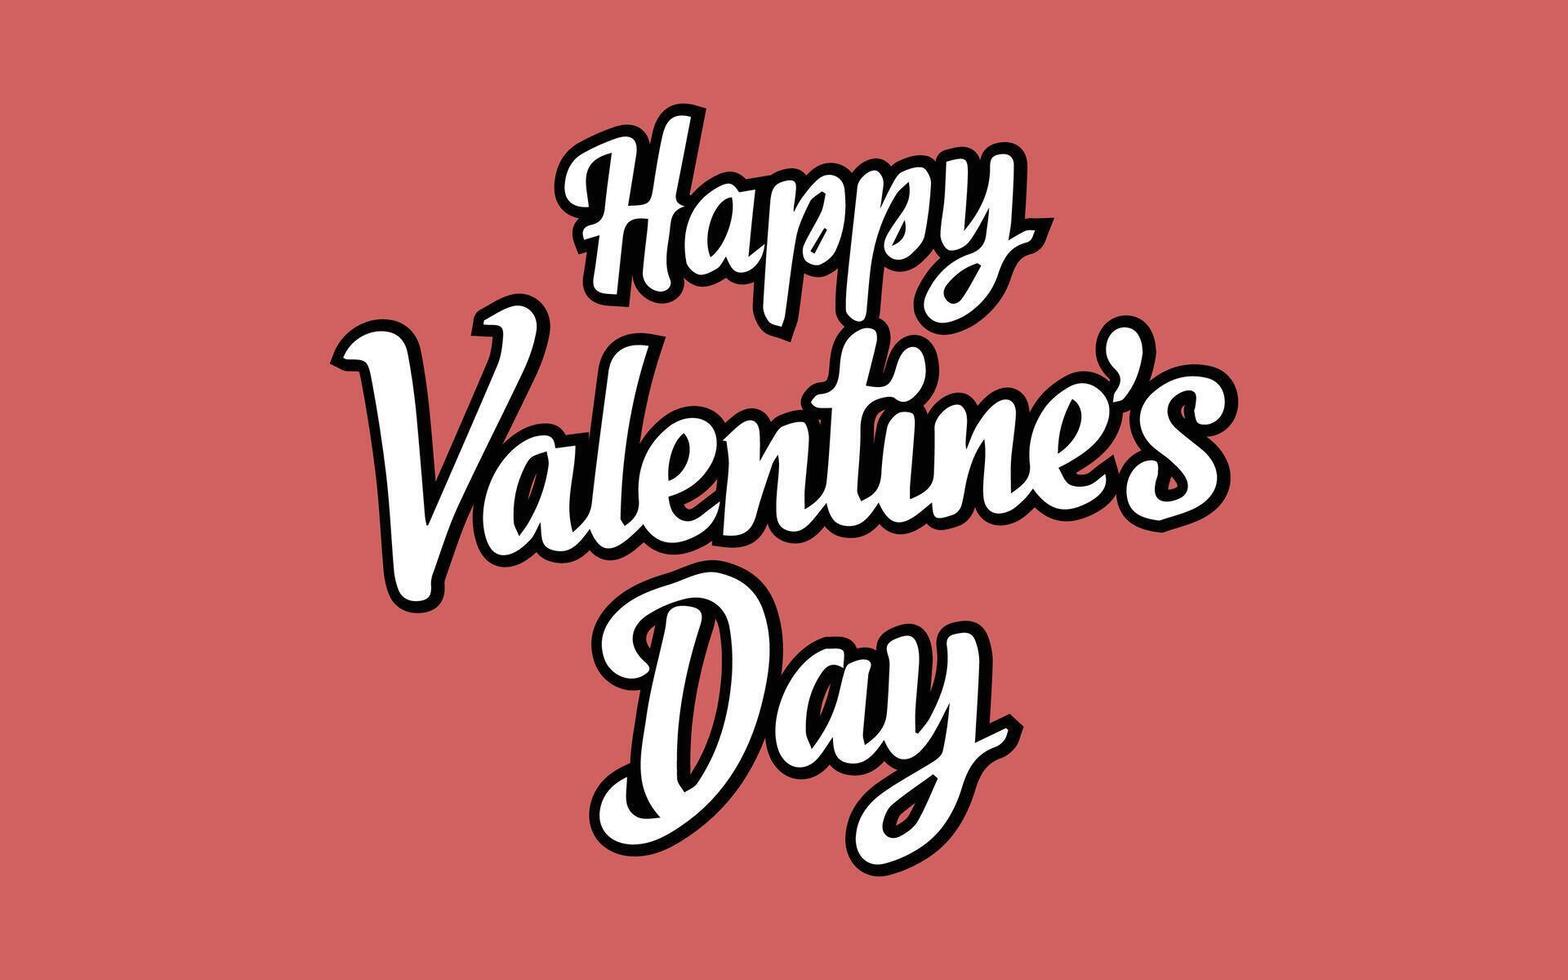 Vector white text Happy Valentines Day. Hand drawn vintage lettering element on the red background